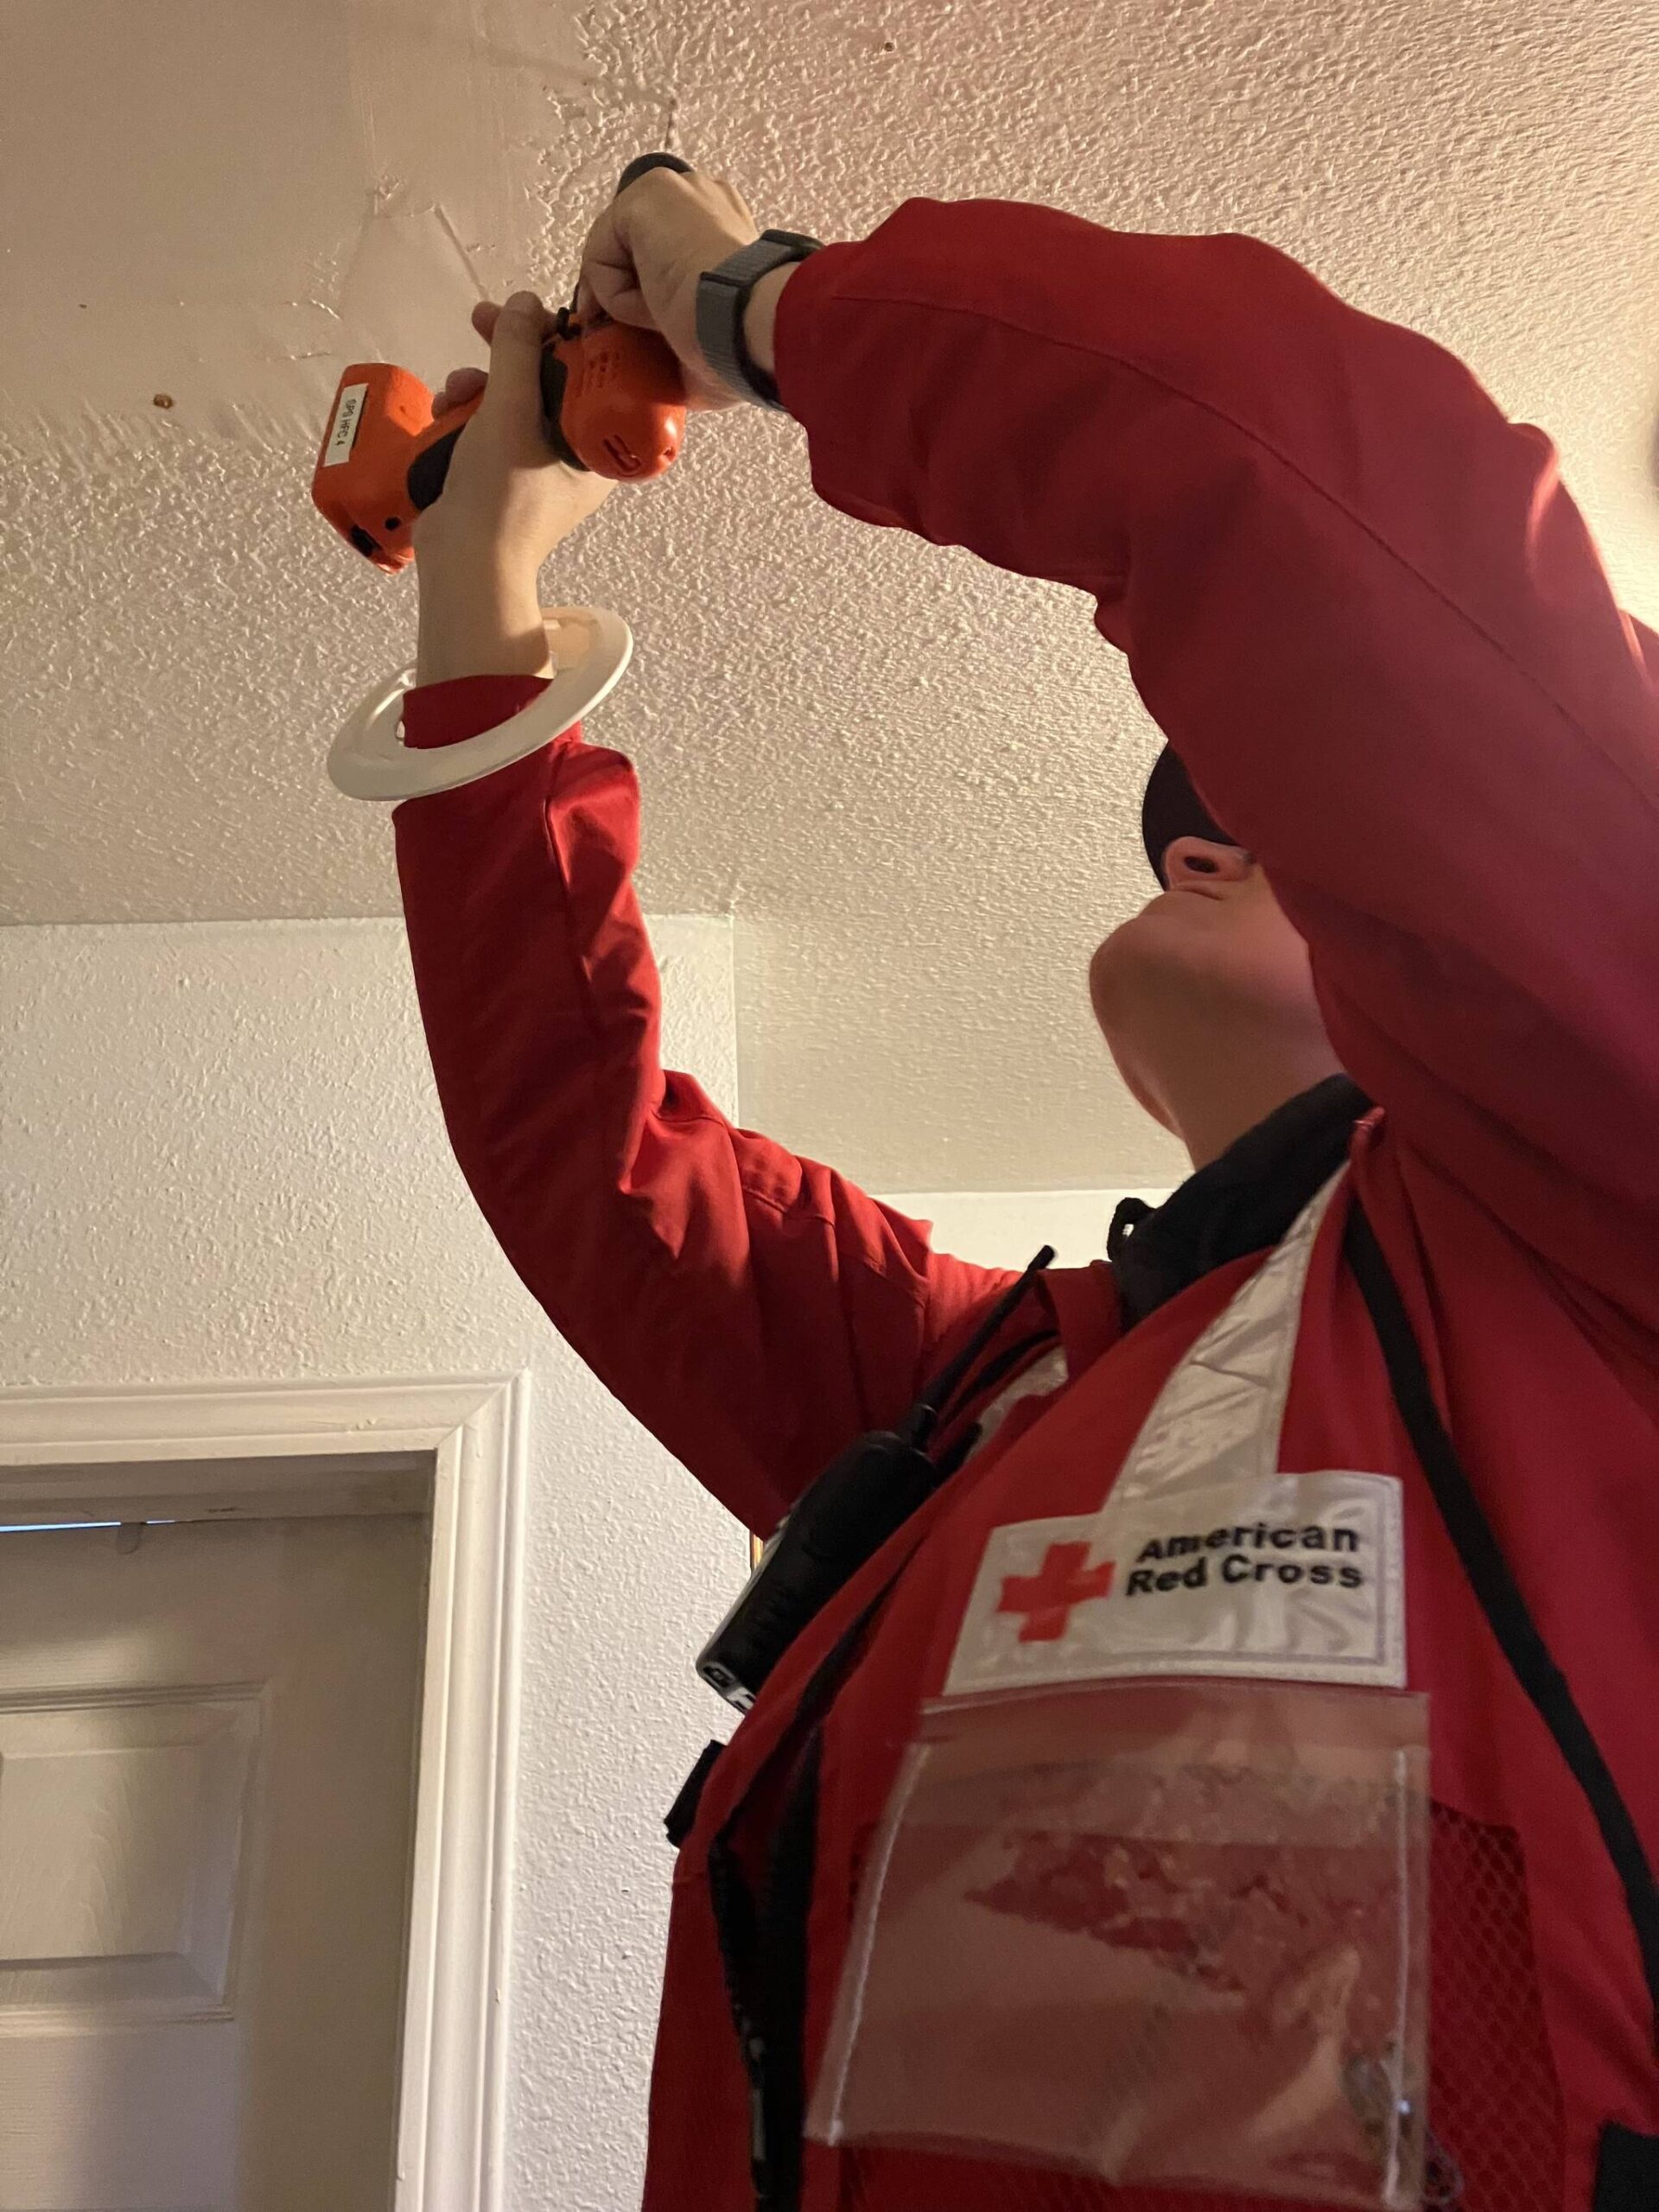 Betsy Robertson
A Red Cross member helps install a smoke detector in a county home on Oct. 21 as part of a push against the region’s high fire risk.